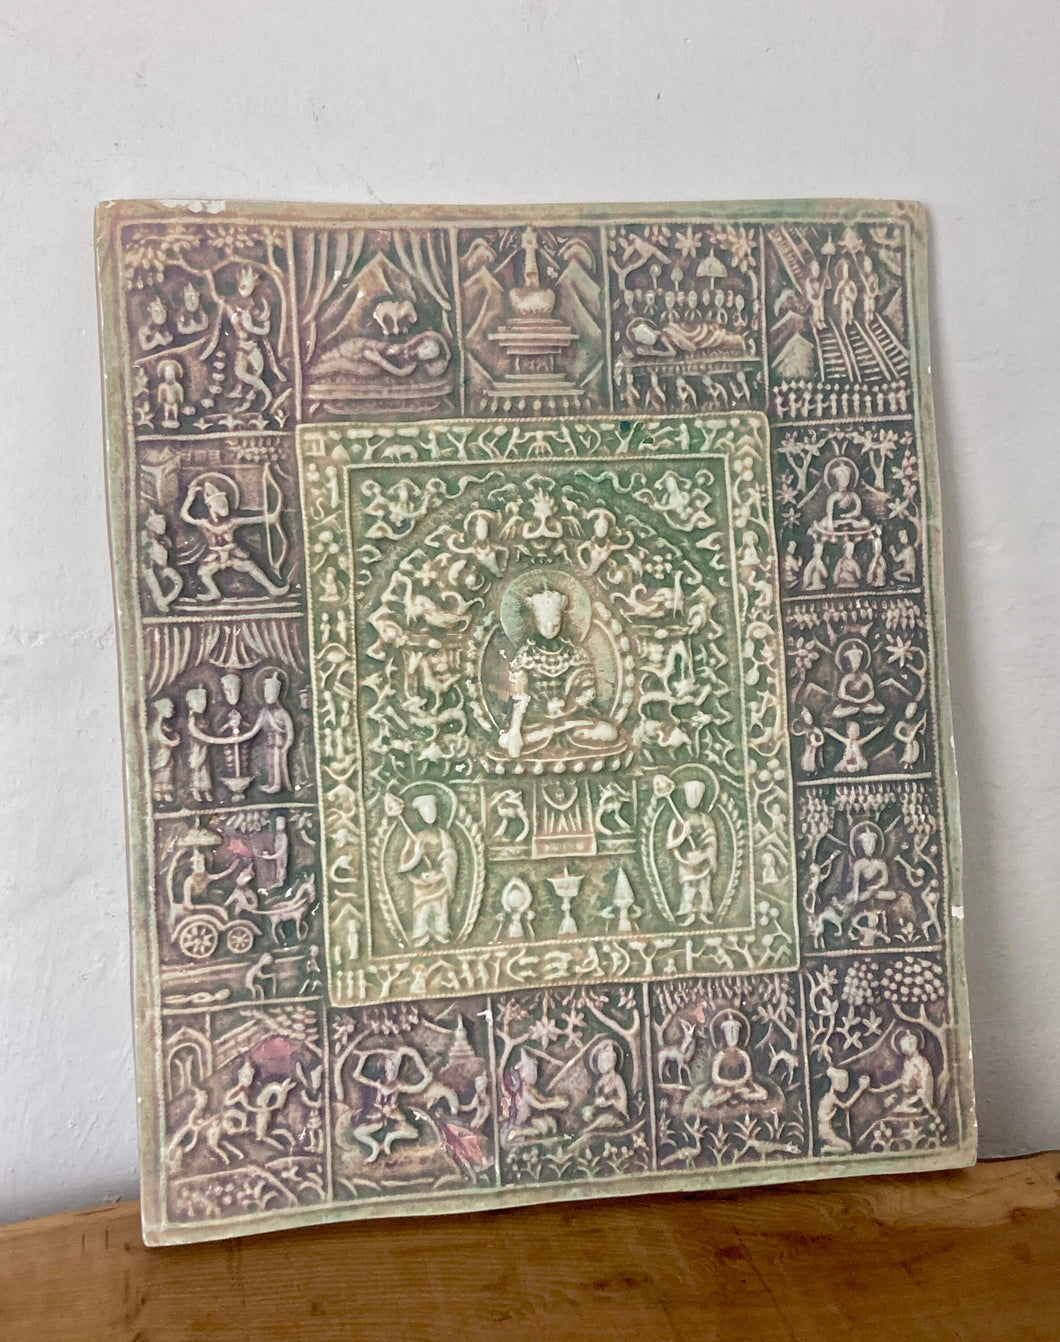 Beautiful early to mid 20th century Buddhist plaque, tile, East Asia ceramics, sculpture, art work